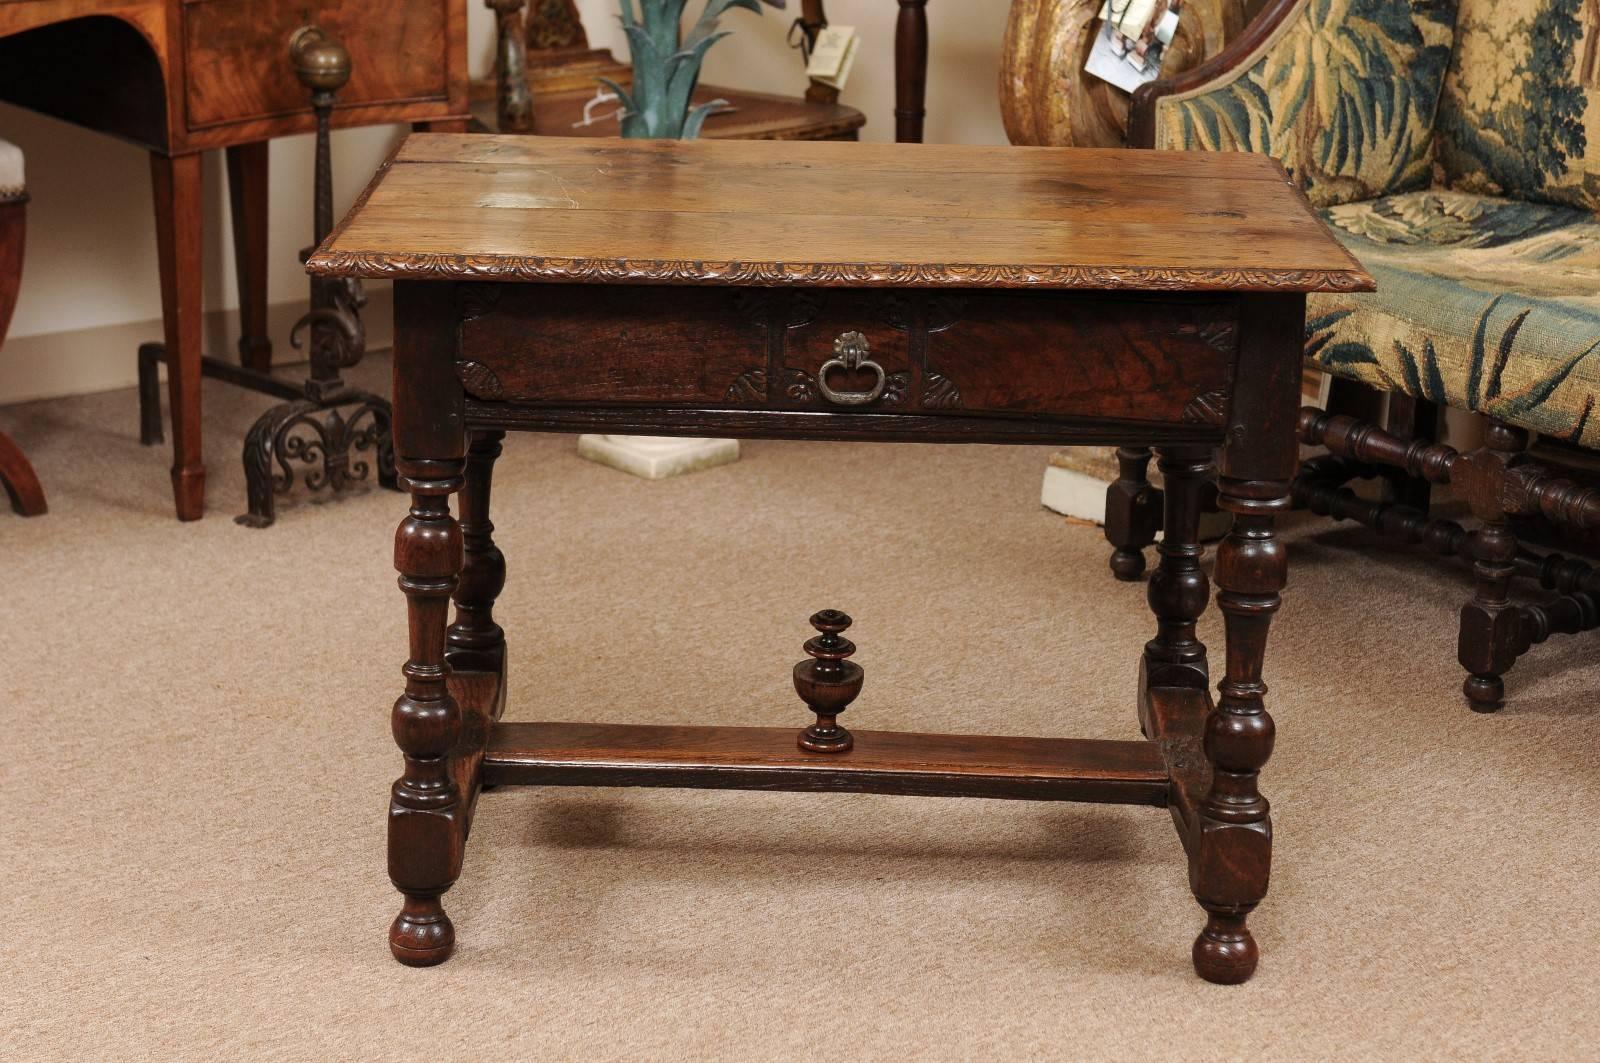 The Spanish 18th century oak table with rectangular top with carved boarder, drawer below with craved flowers and wrought iron pull. All resting on turned legs with stretcher and finial.